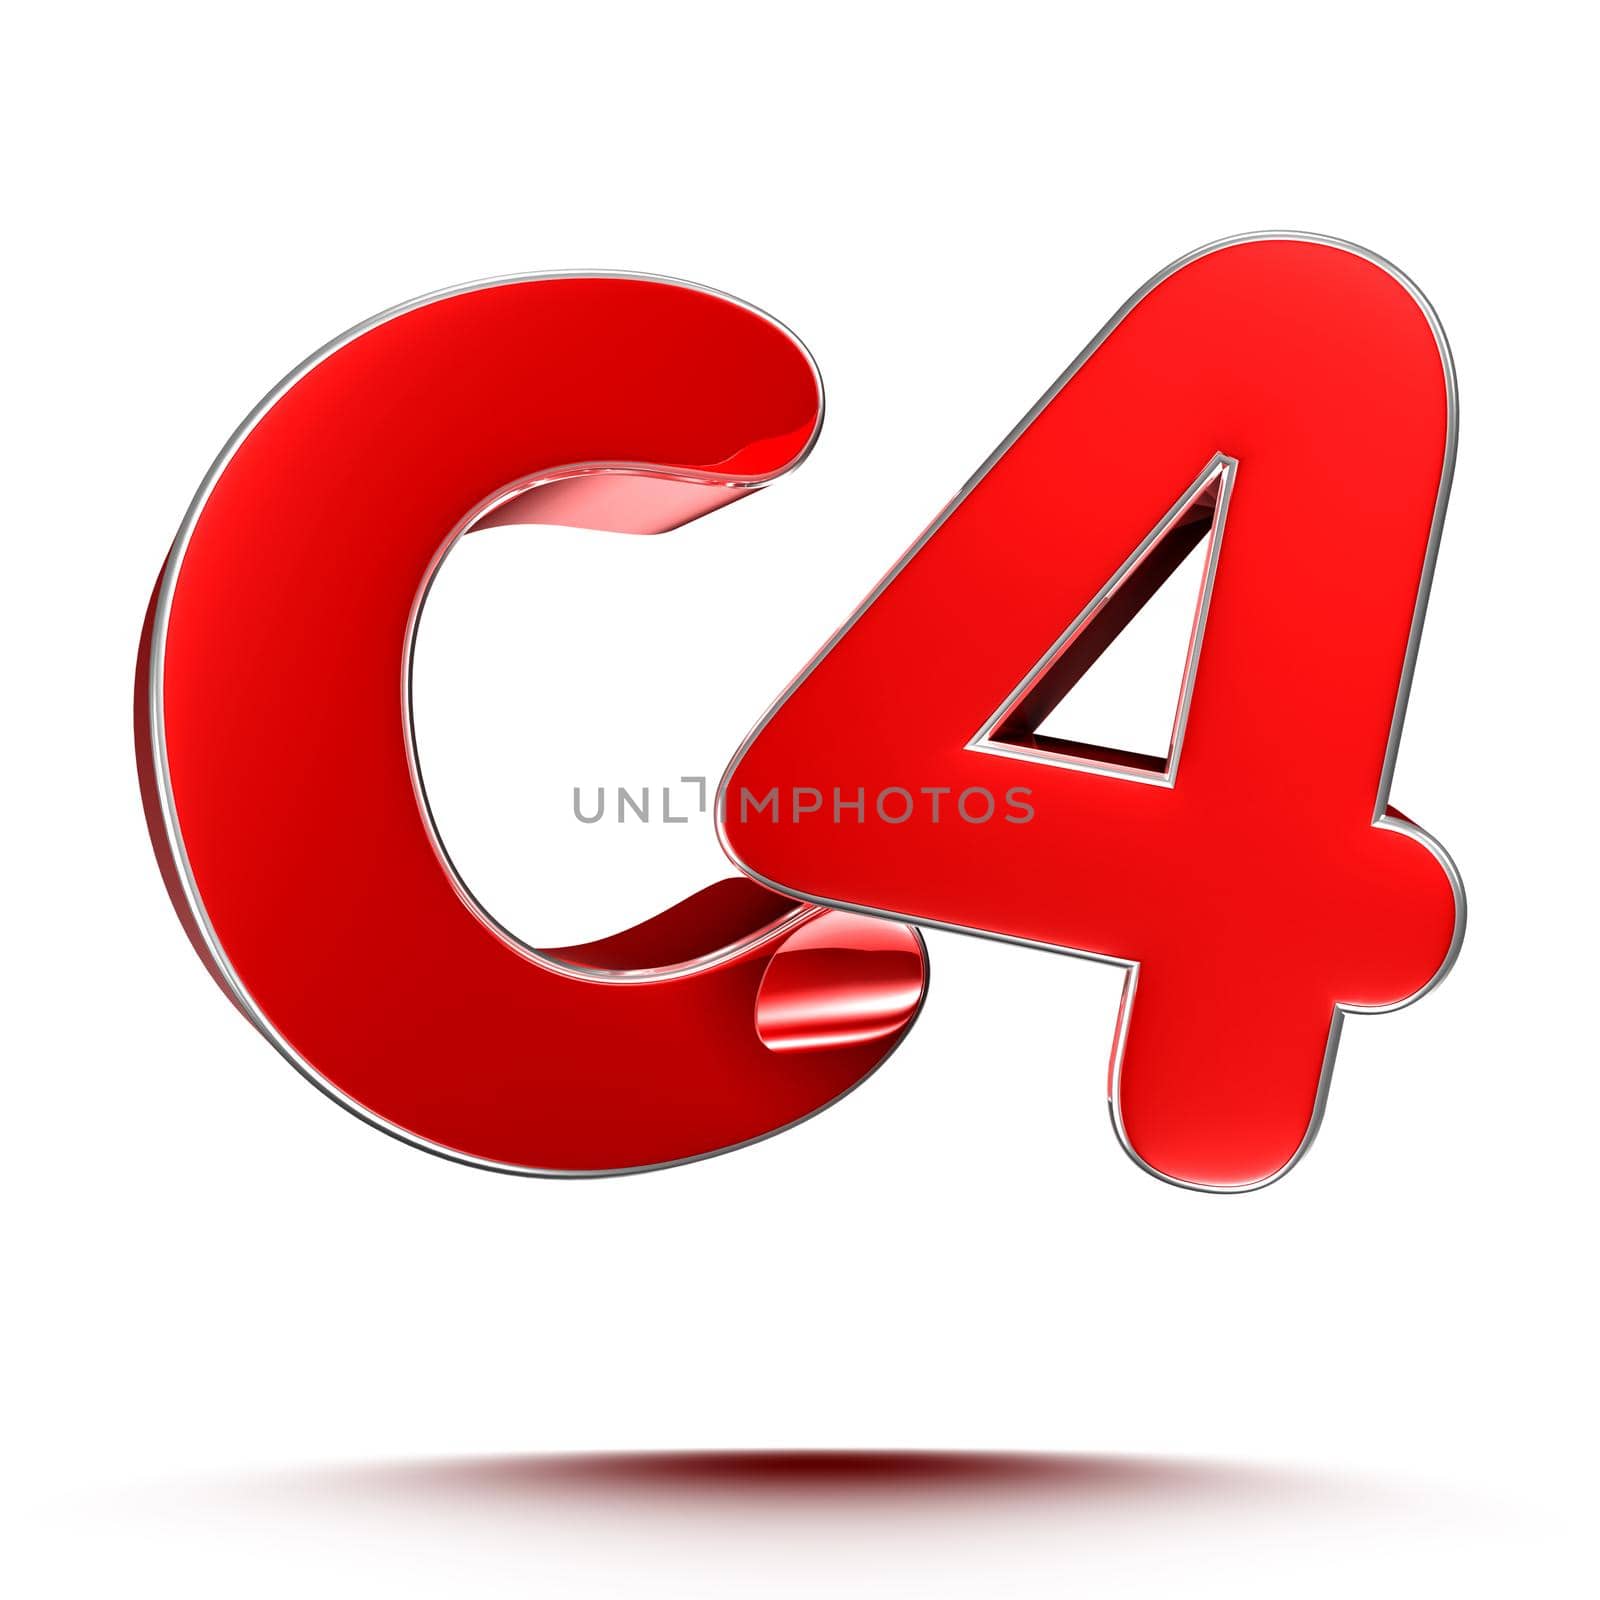 C4 red 3D illustration on white background with clipping path.